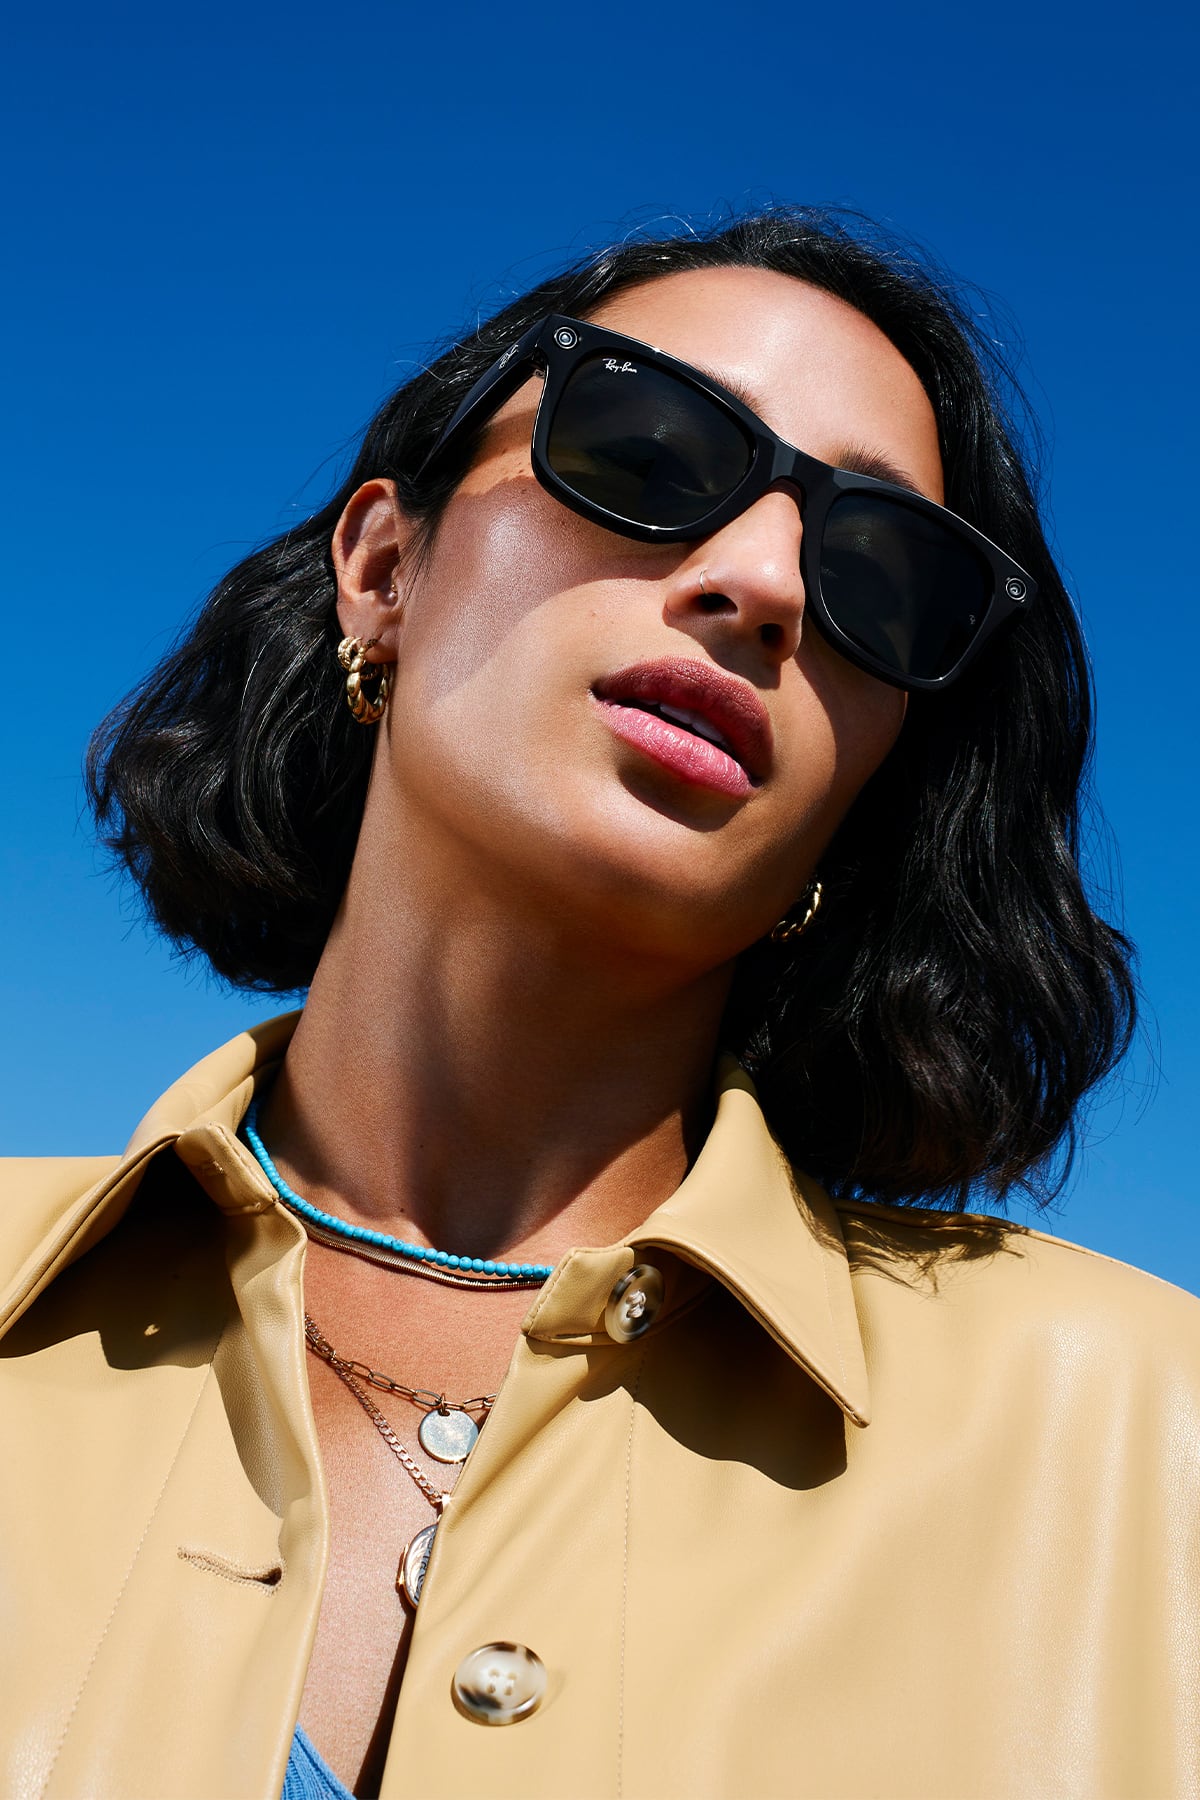 Ray-Ban Maker EssilorLuxottica Confirms Meta Interested in Stake